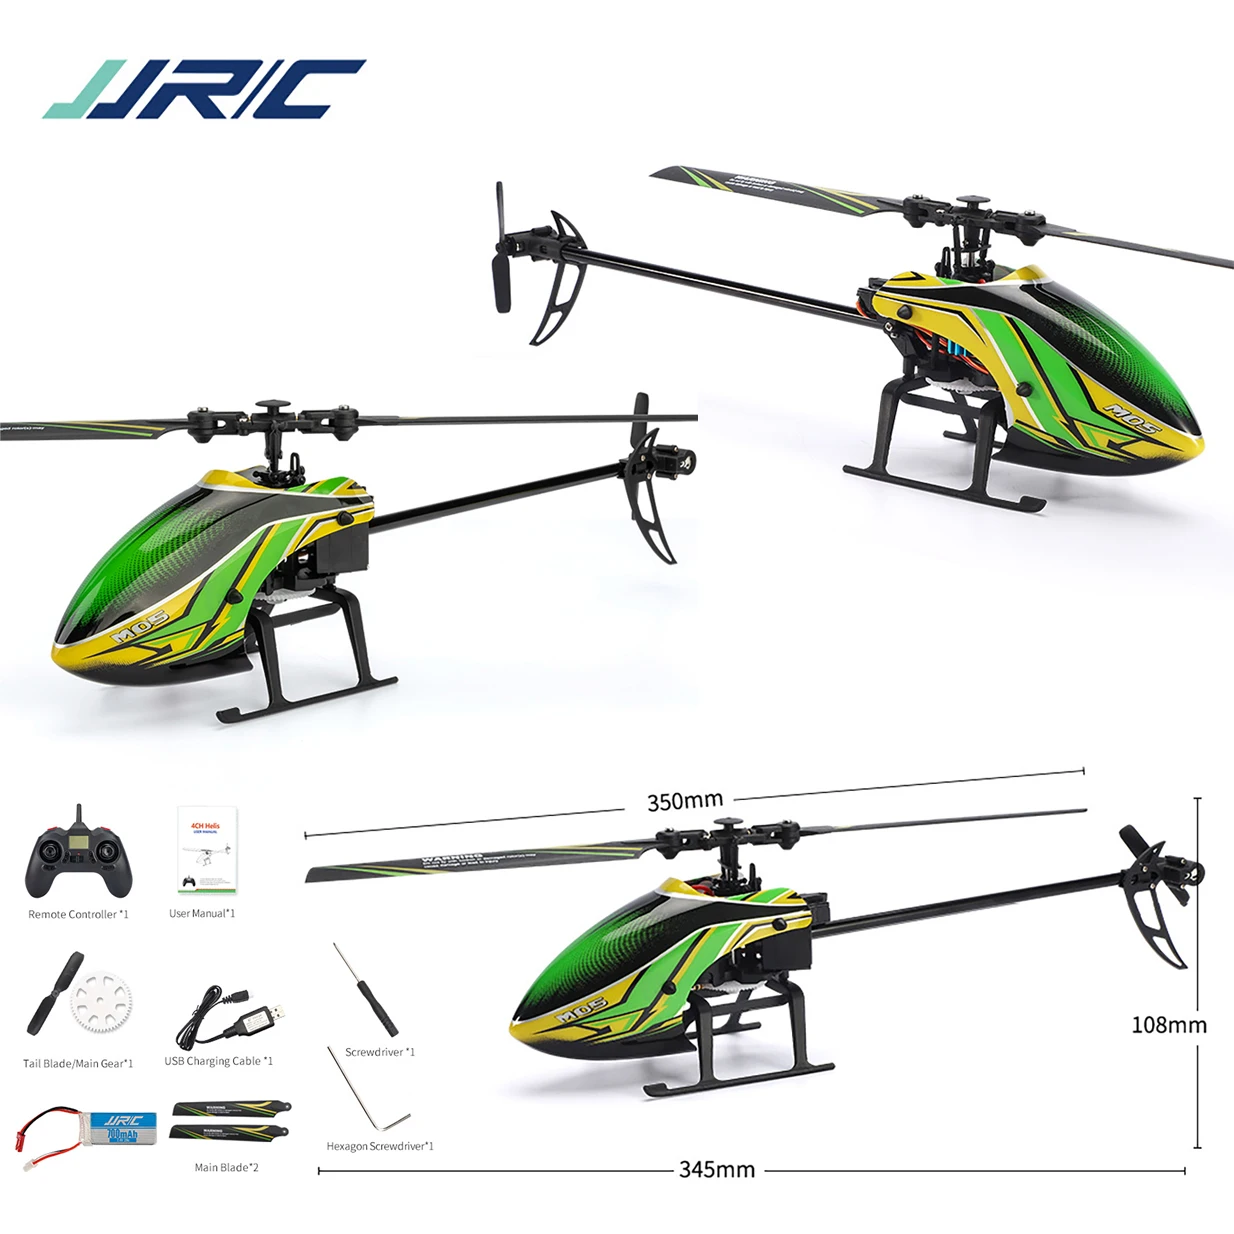 

Original JJRC M05 2.4G Remote Control Aircraft Rc Helicopter 4CH 6-Aixs Gyro Anti-collision Alttitude Hold Toy Plane Drone RTF